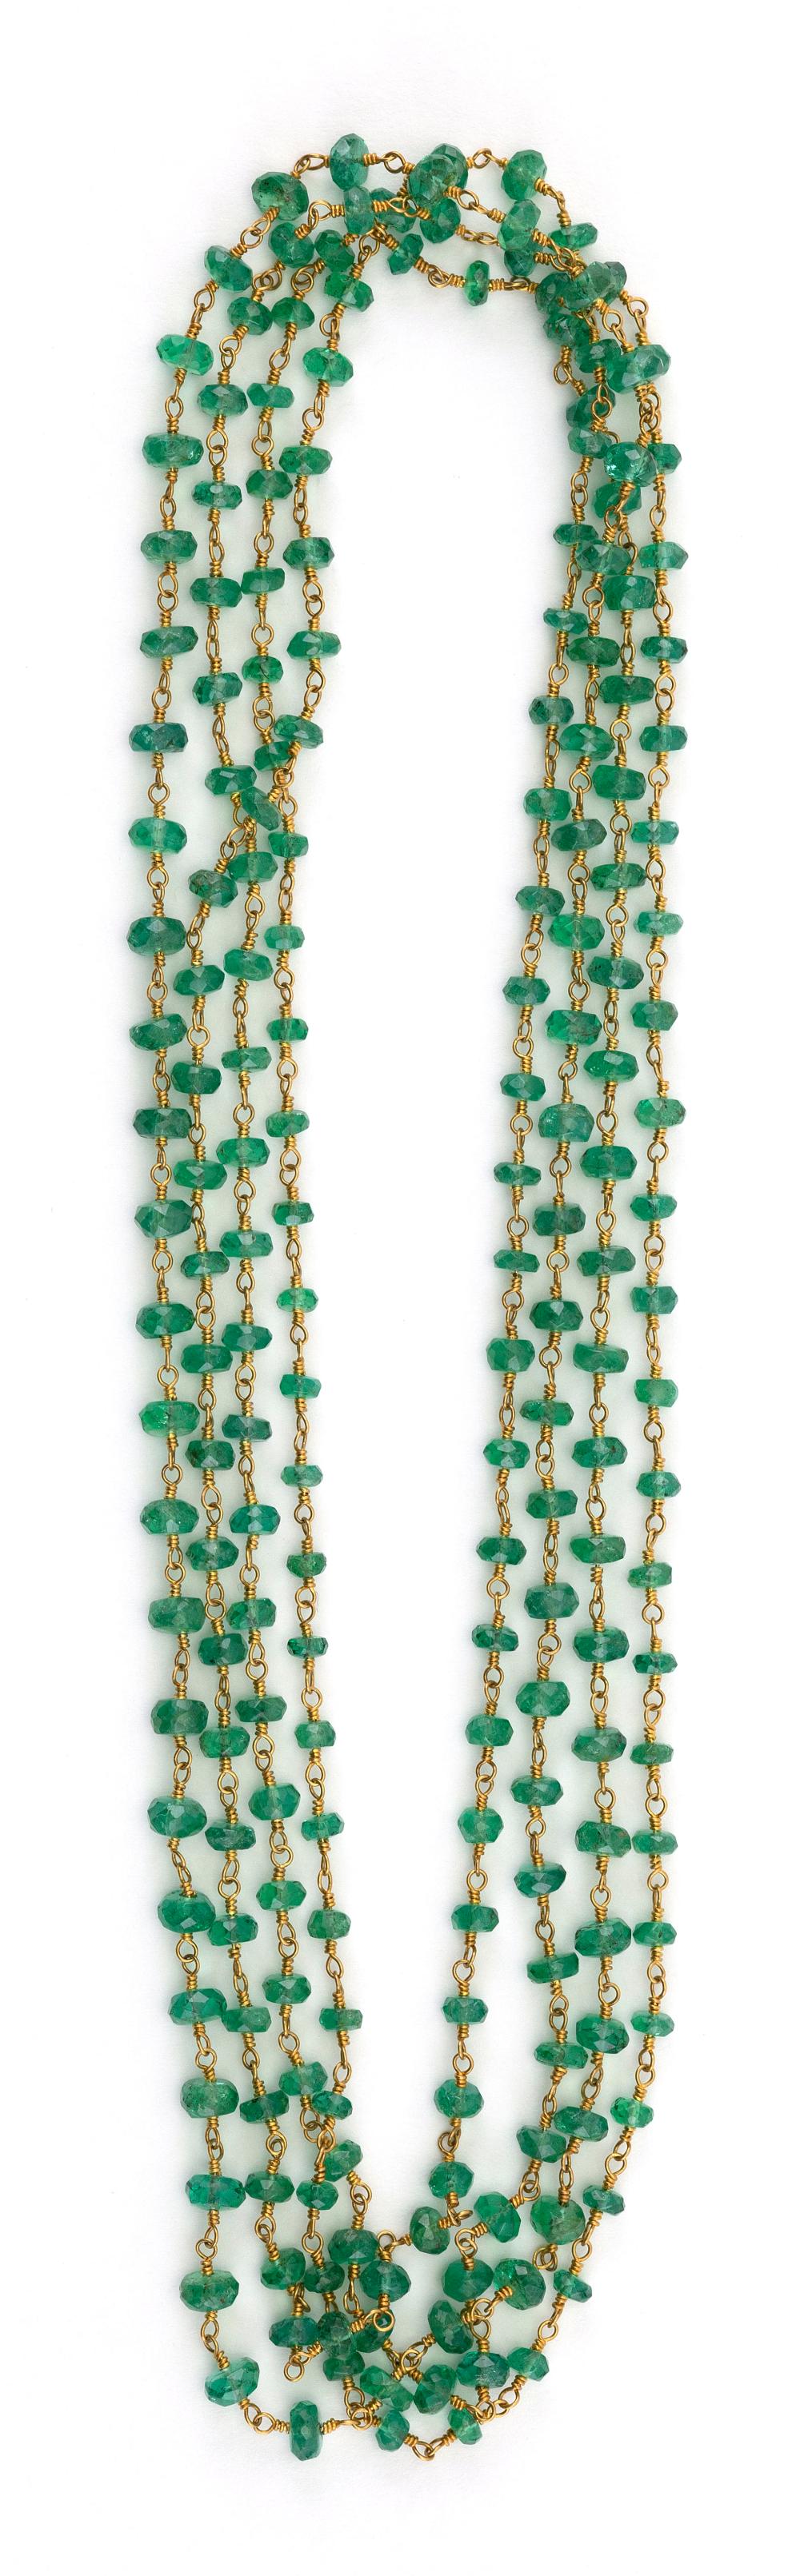 GOLD AND EMERALD BEAD NECKLACE